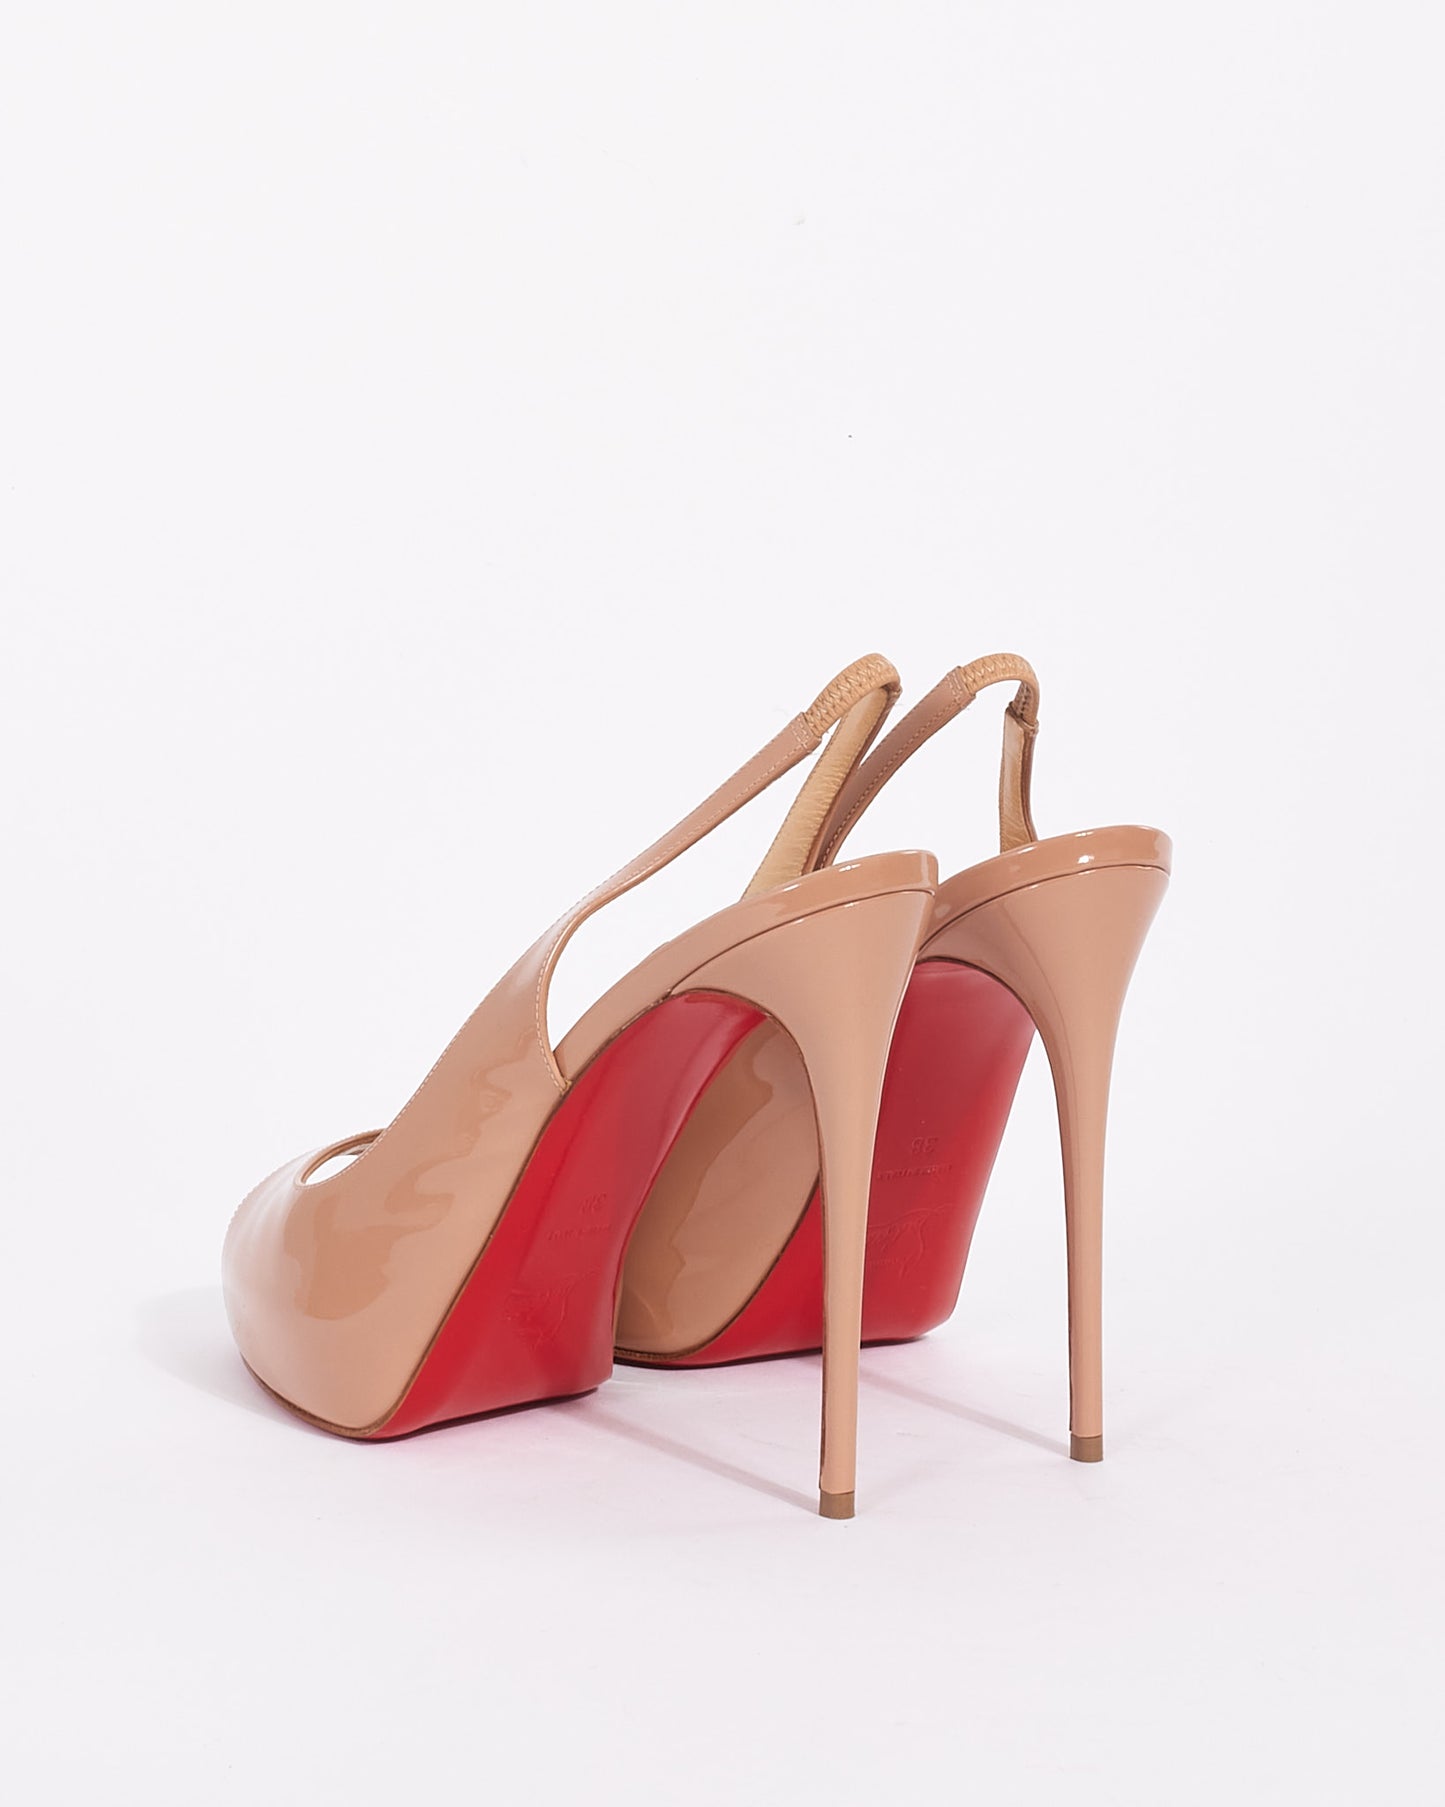 Christian Louboutin Beige Patent Leather Private Number 120 Peep Toe Heels - 38